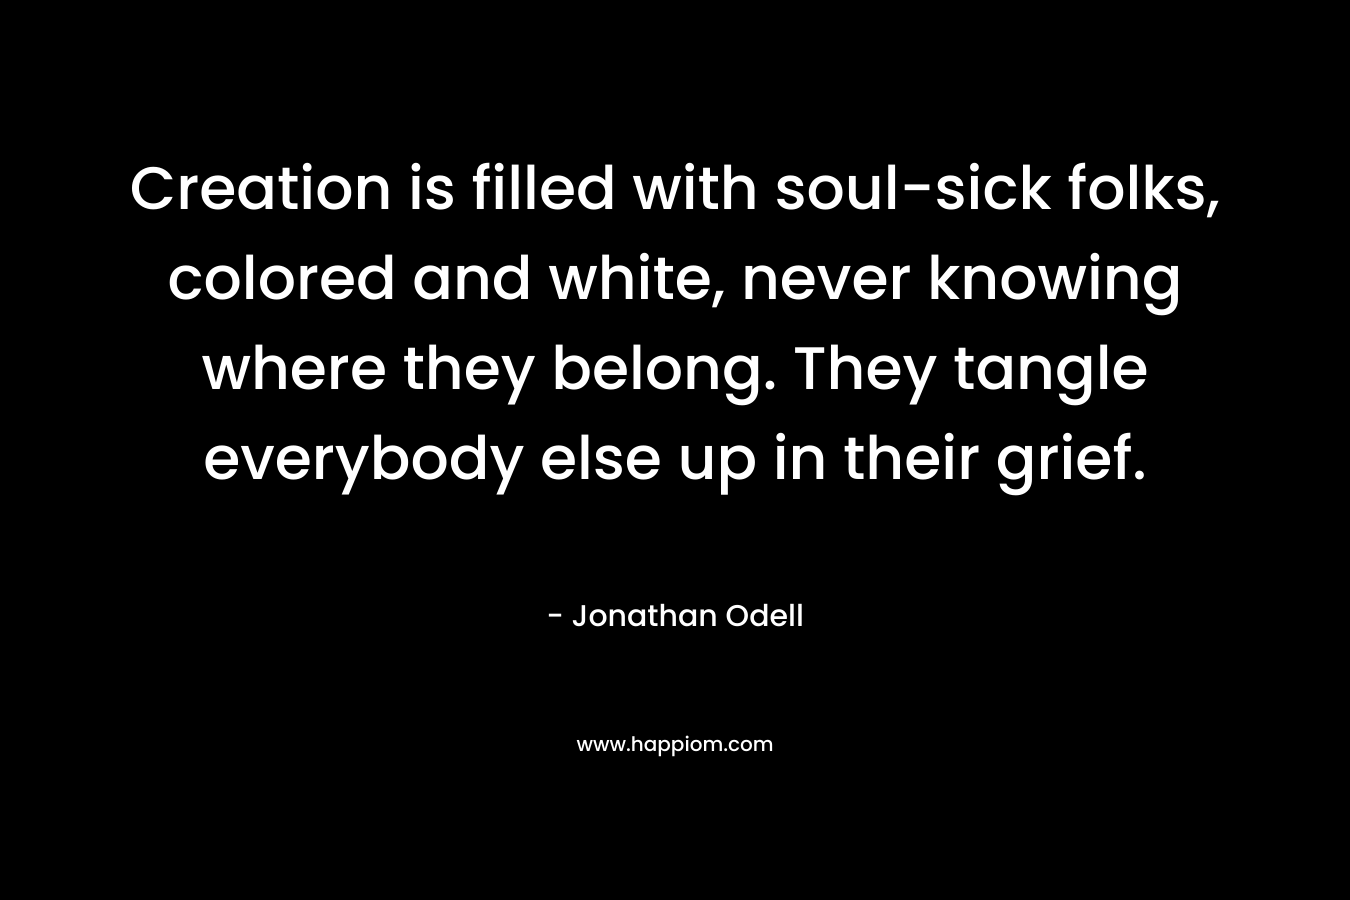 Creation is filled with soul-sick folks, colored and white, never knowing where they belong. They tangle everybody else up in their grief.